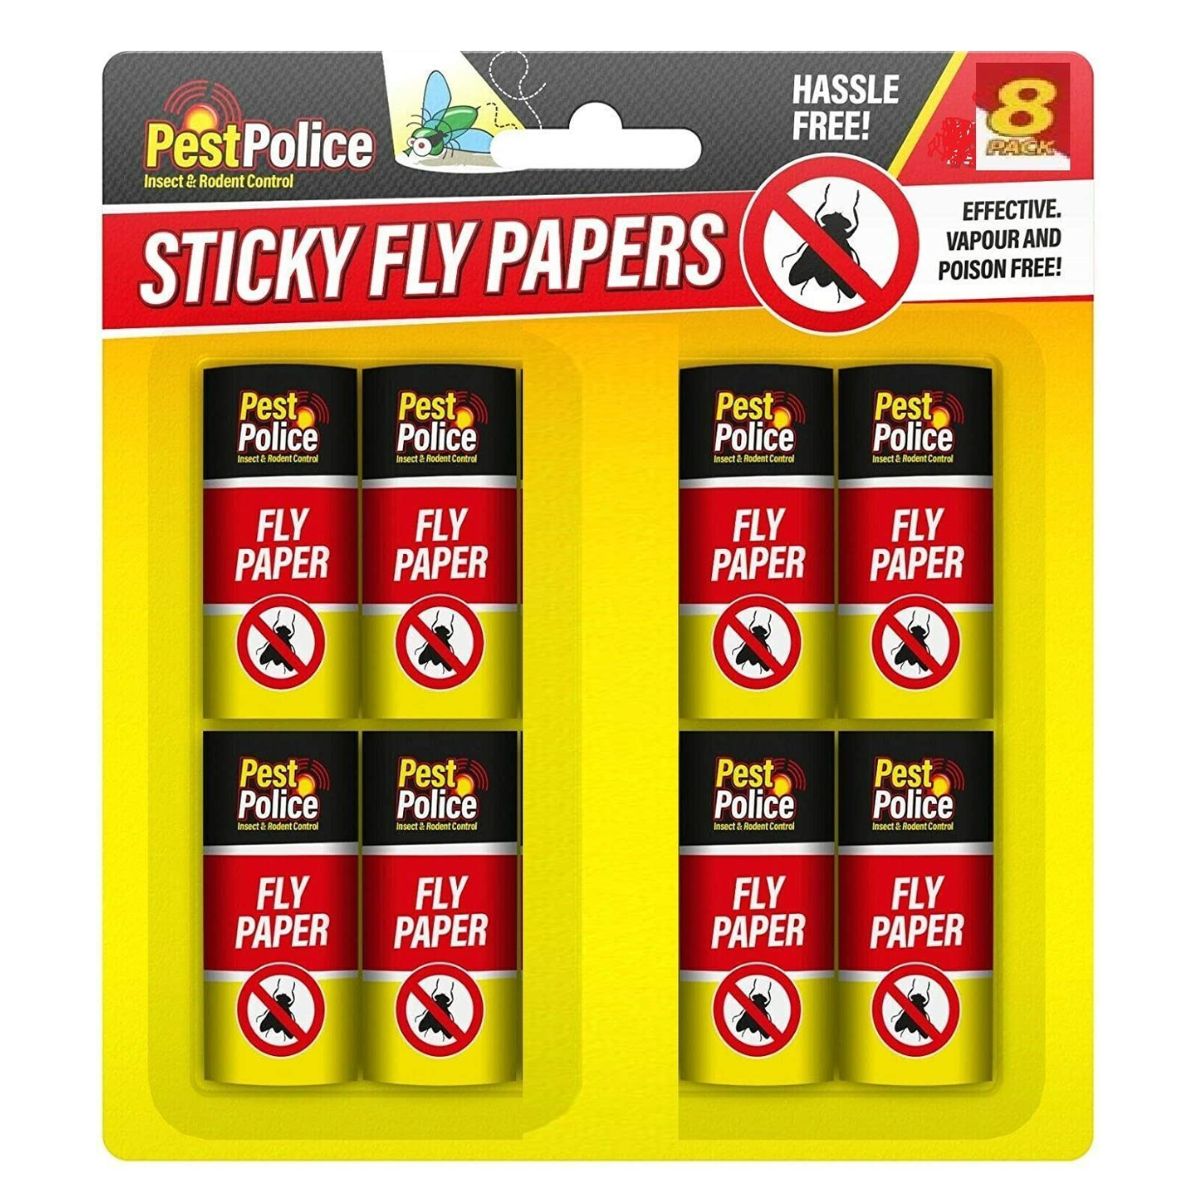 A pack of Pest Police - Fly Insect Catcher Paper Sticky Glue Bug Trap Killer Strong Roll Tape Strip - 8pcs in a package.